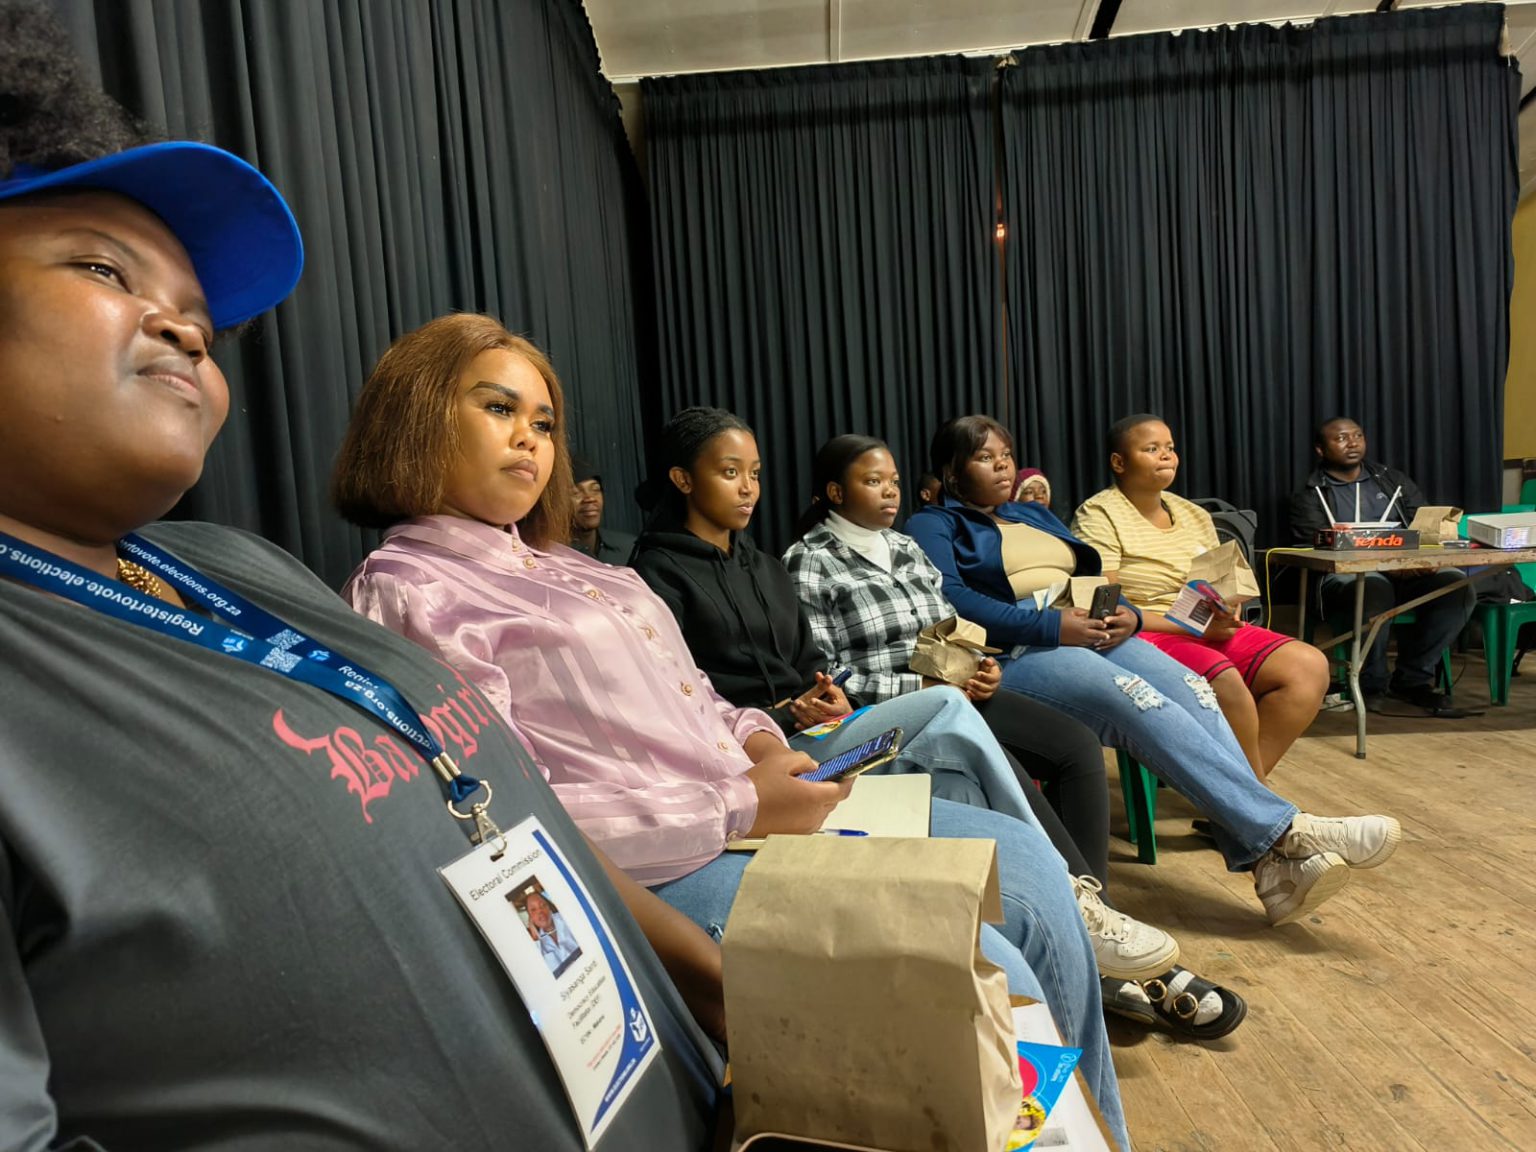 The youth of Makhanda at Noluthando Hall on Saturday, 8 November listening and engaging about social issues affecting South Africans. Photo: Sourced